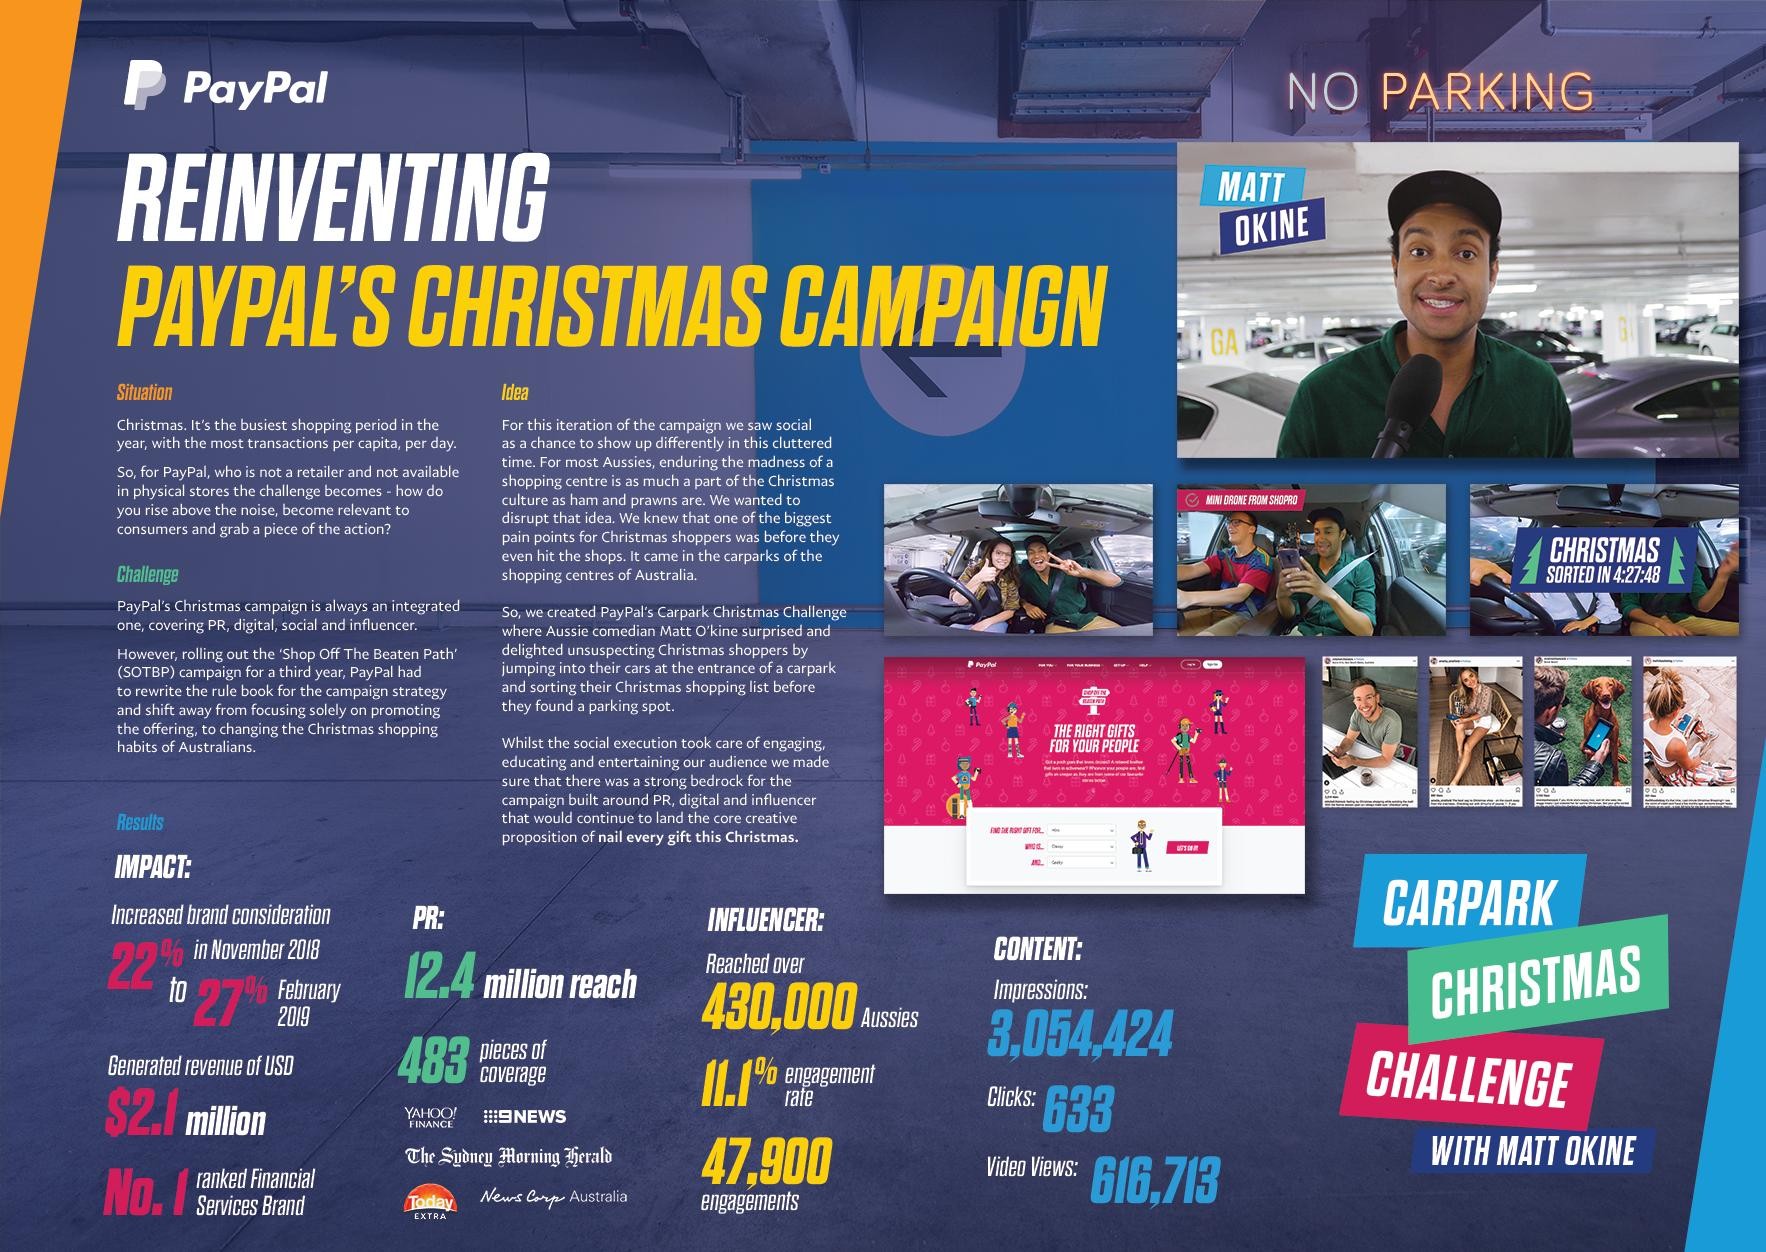 Reinventing PayPal Australia’s 2018 Christmas Campaign